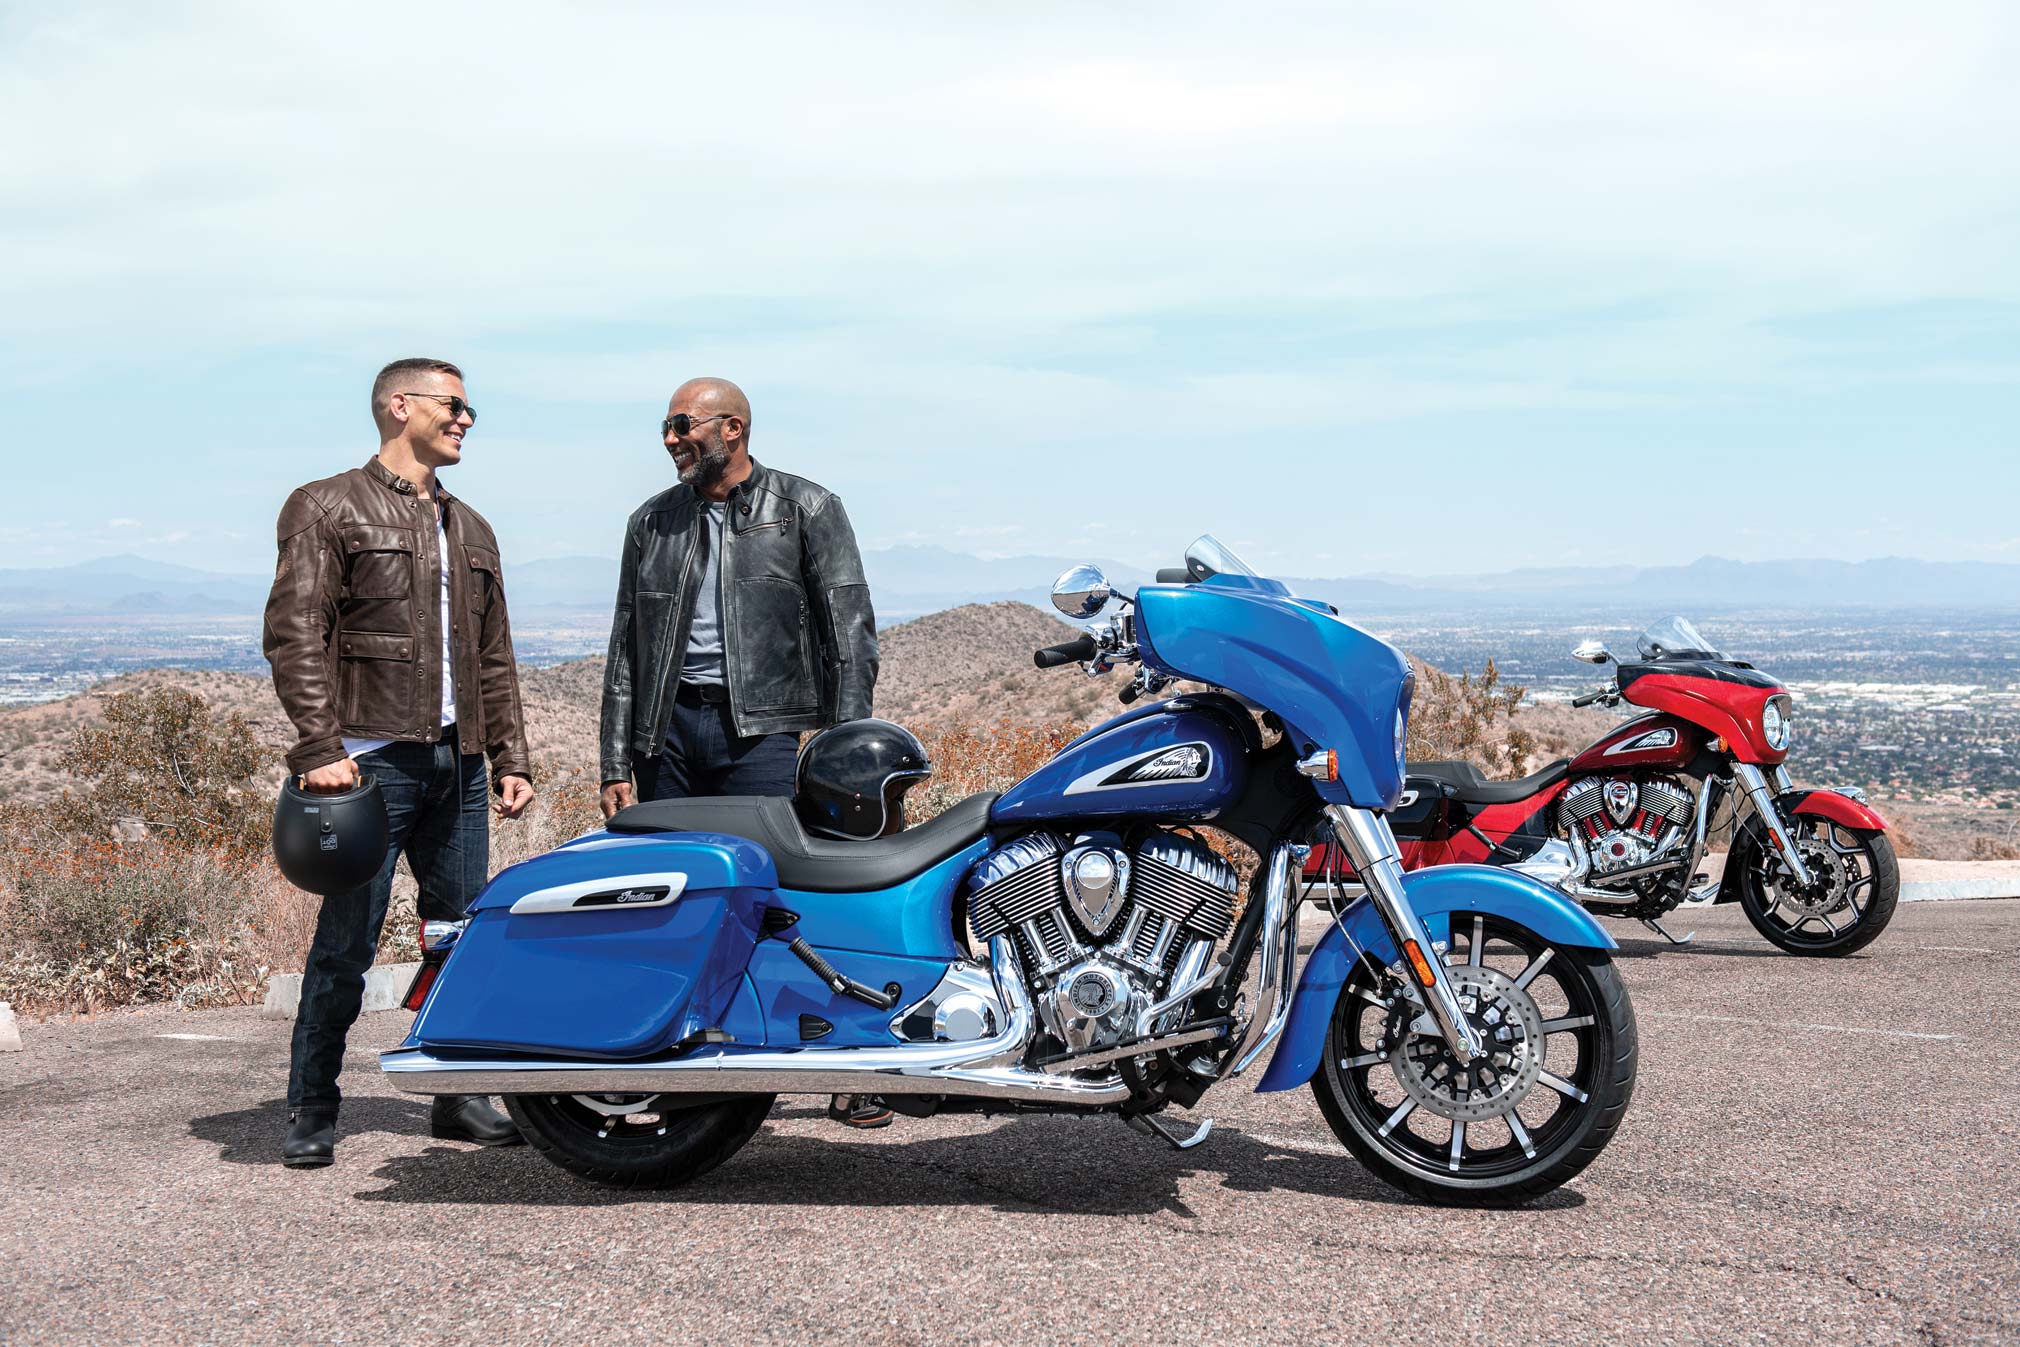 2020 Indian Chieftain Limited: The Indian Motorcycle Chieftain Limited pack...